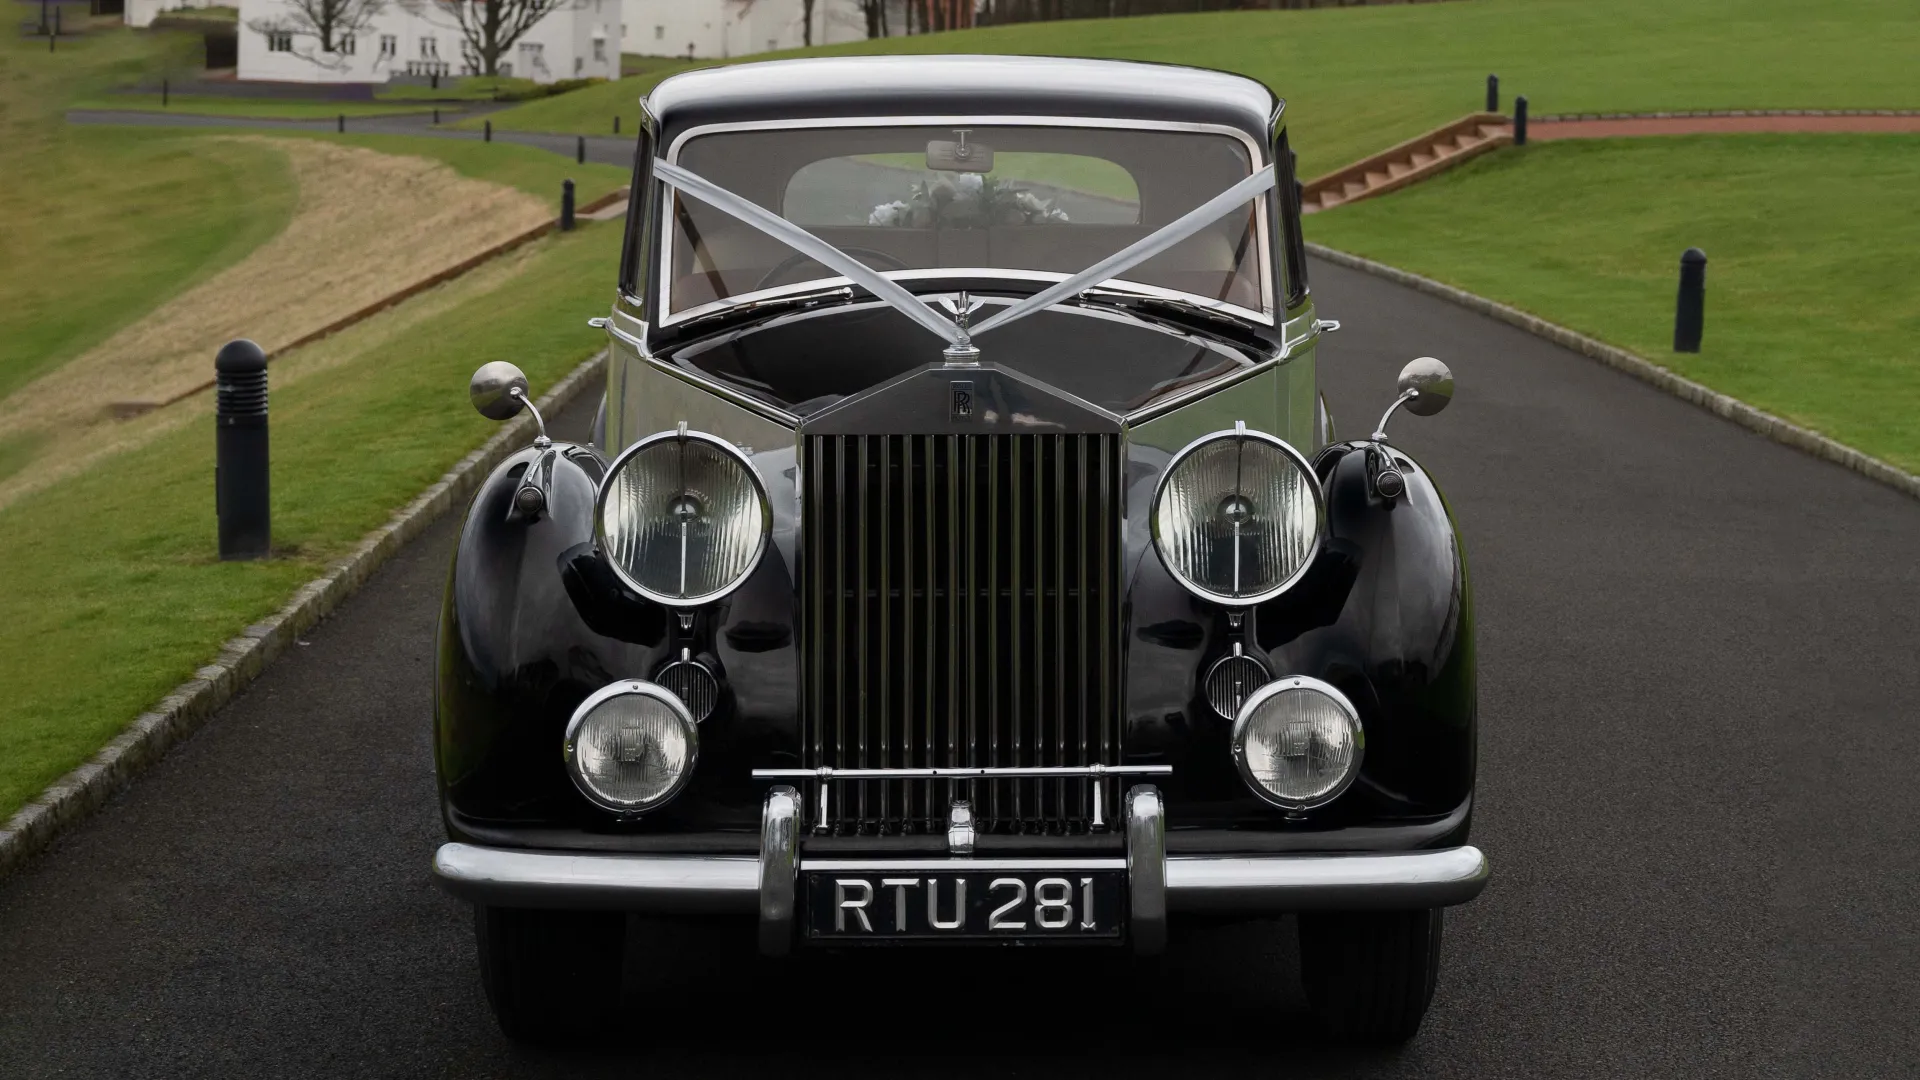 Front view of Rolls-Royce silver Wraith LWB